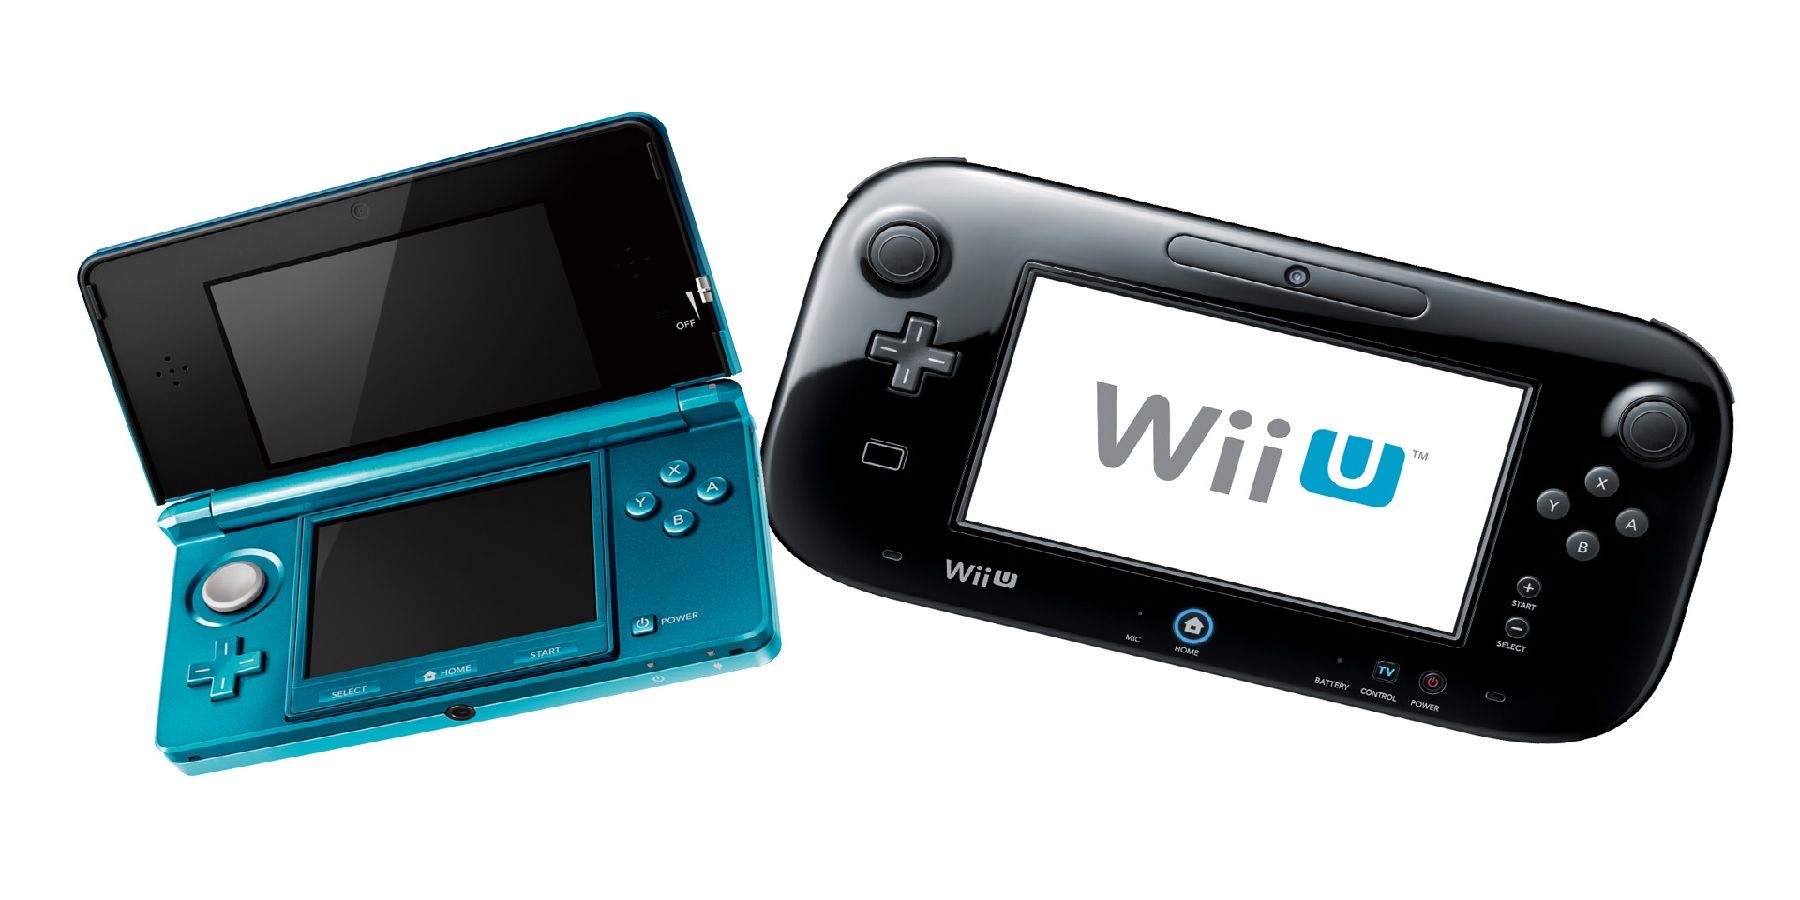 Nintendo Is Shutting Down The Wii U And 3DS eShop